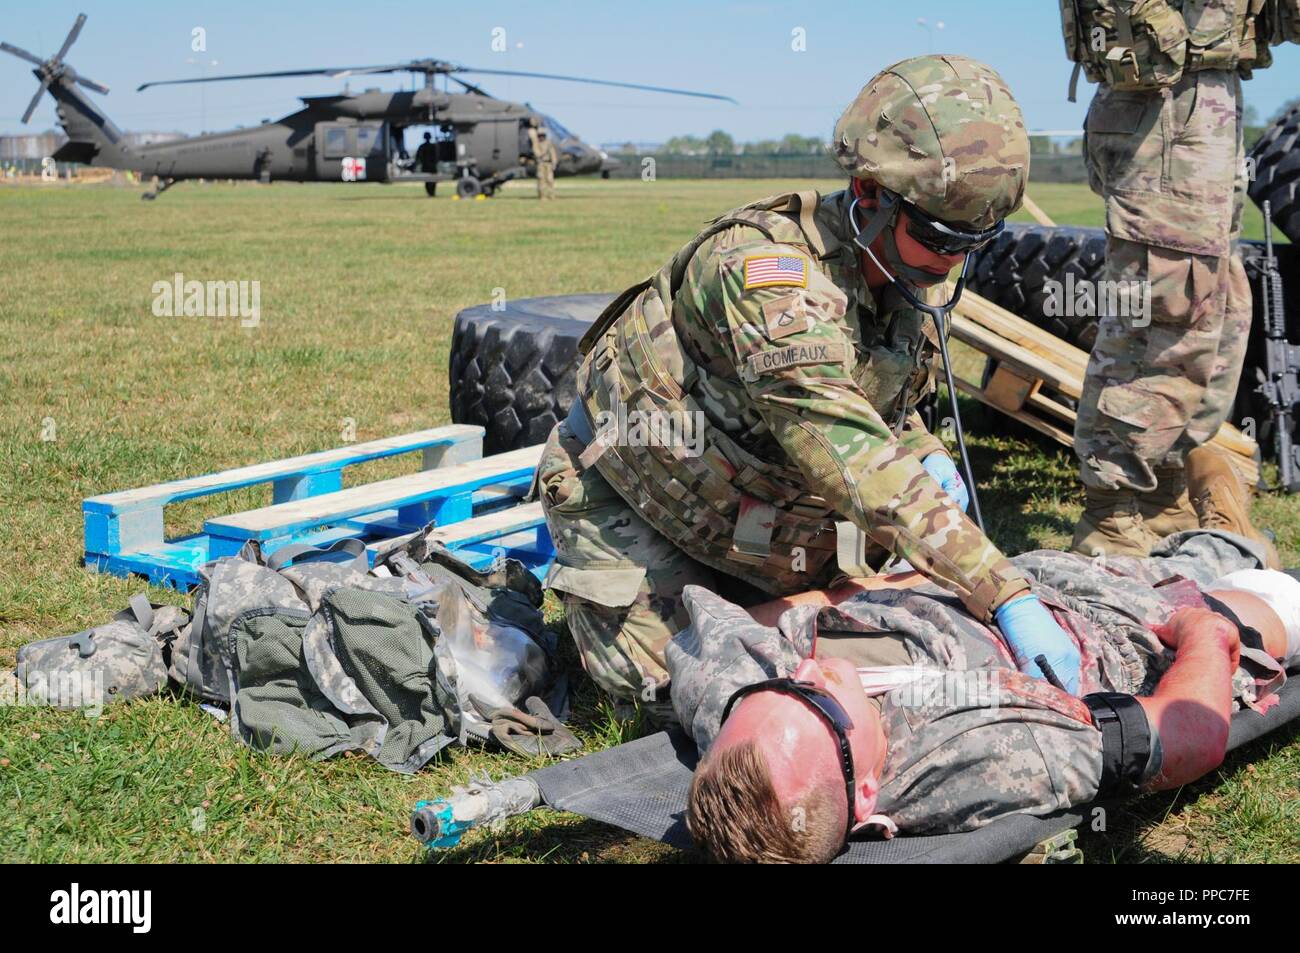 U.S. Army Pfc. Jasmine Comeaux a combat medic assigned to The Headquarters and Headquarters Company, 2nd Battalion 5th Cavalry Regiment, 1st Armored Brigade Combat Team, 1st Cavalry Division administers aid to a simulated casualty at Mihail Kogalniceanu Air Base in Romania, August 20, 2018. Soldiers conducted Table VIII Medic Skills Validation, an annual training event required for Soldiers to keep their Military Occupational Specialty qualification as a combat medic. Stock Photo